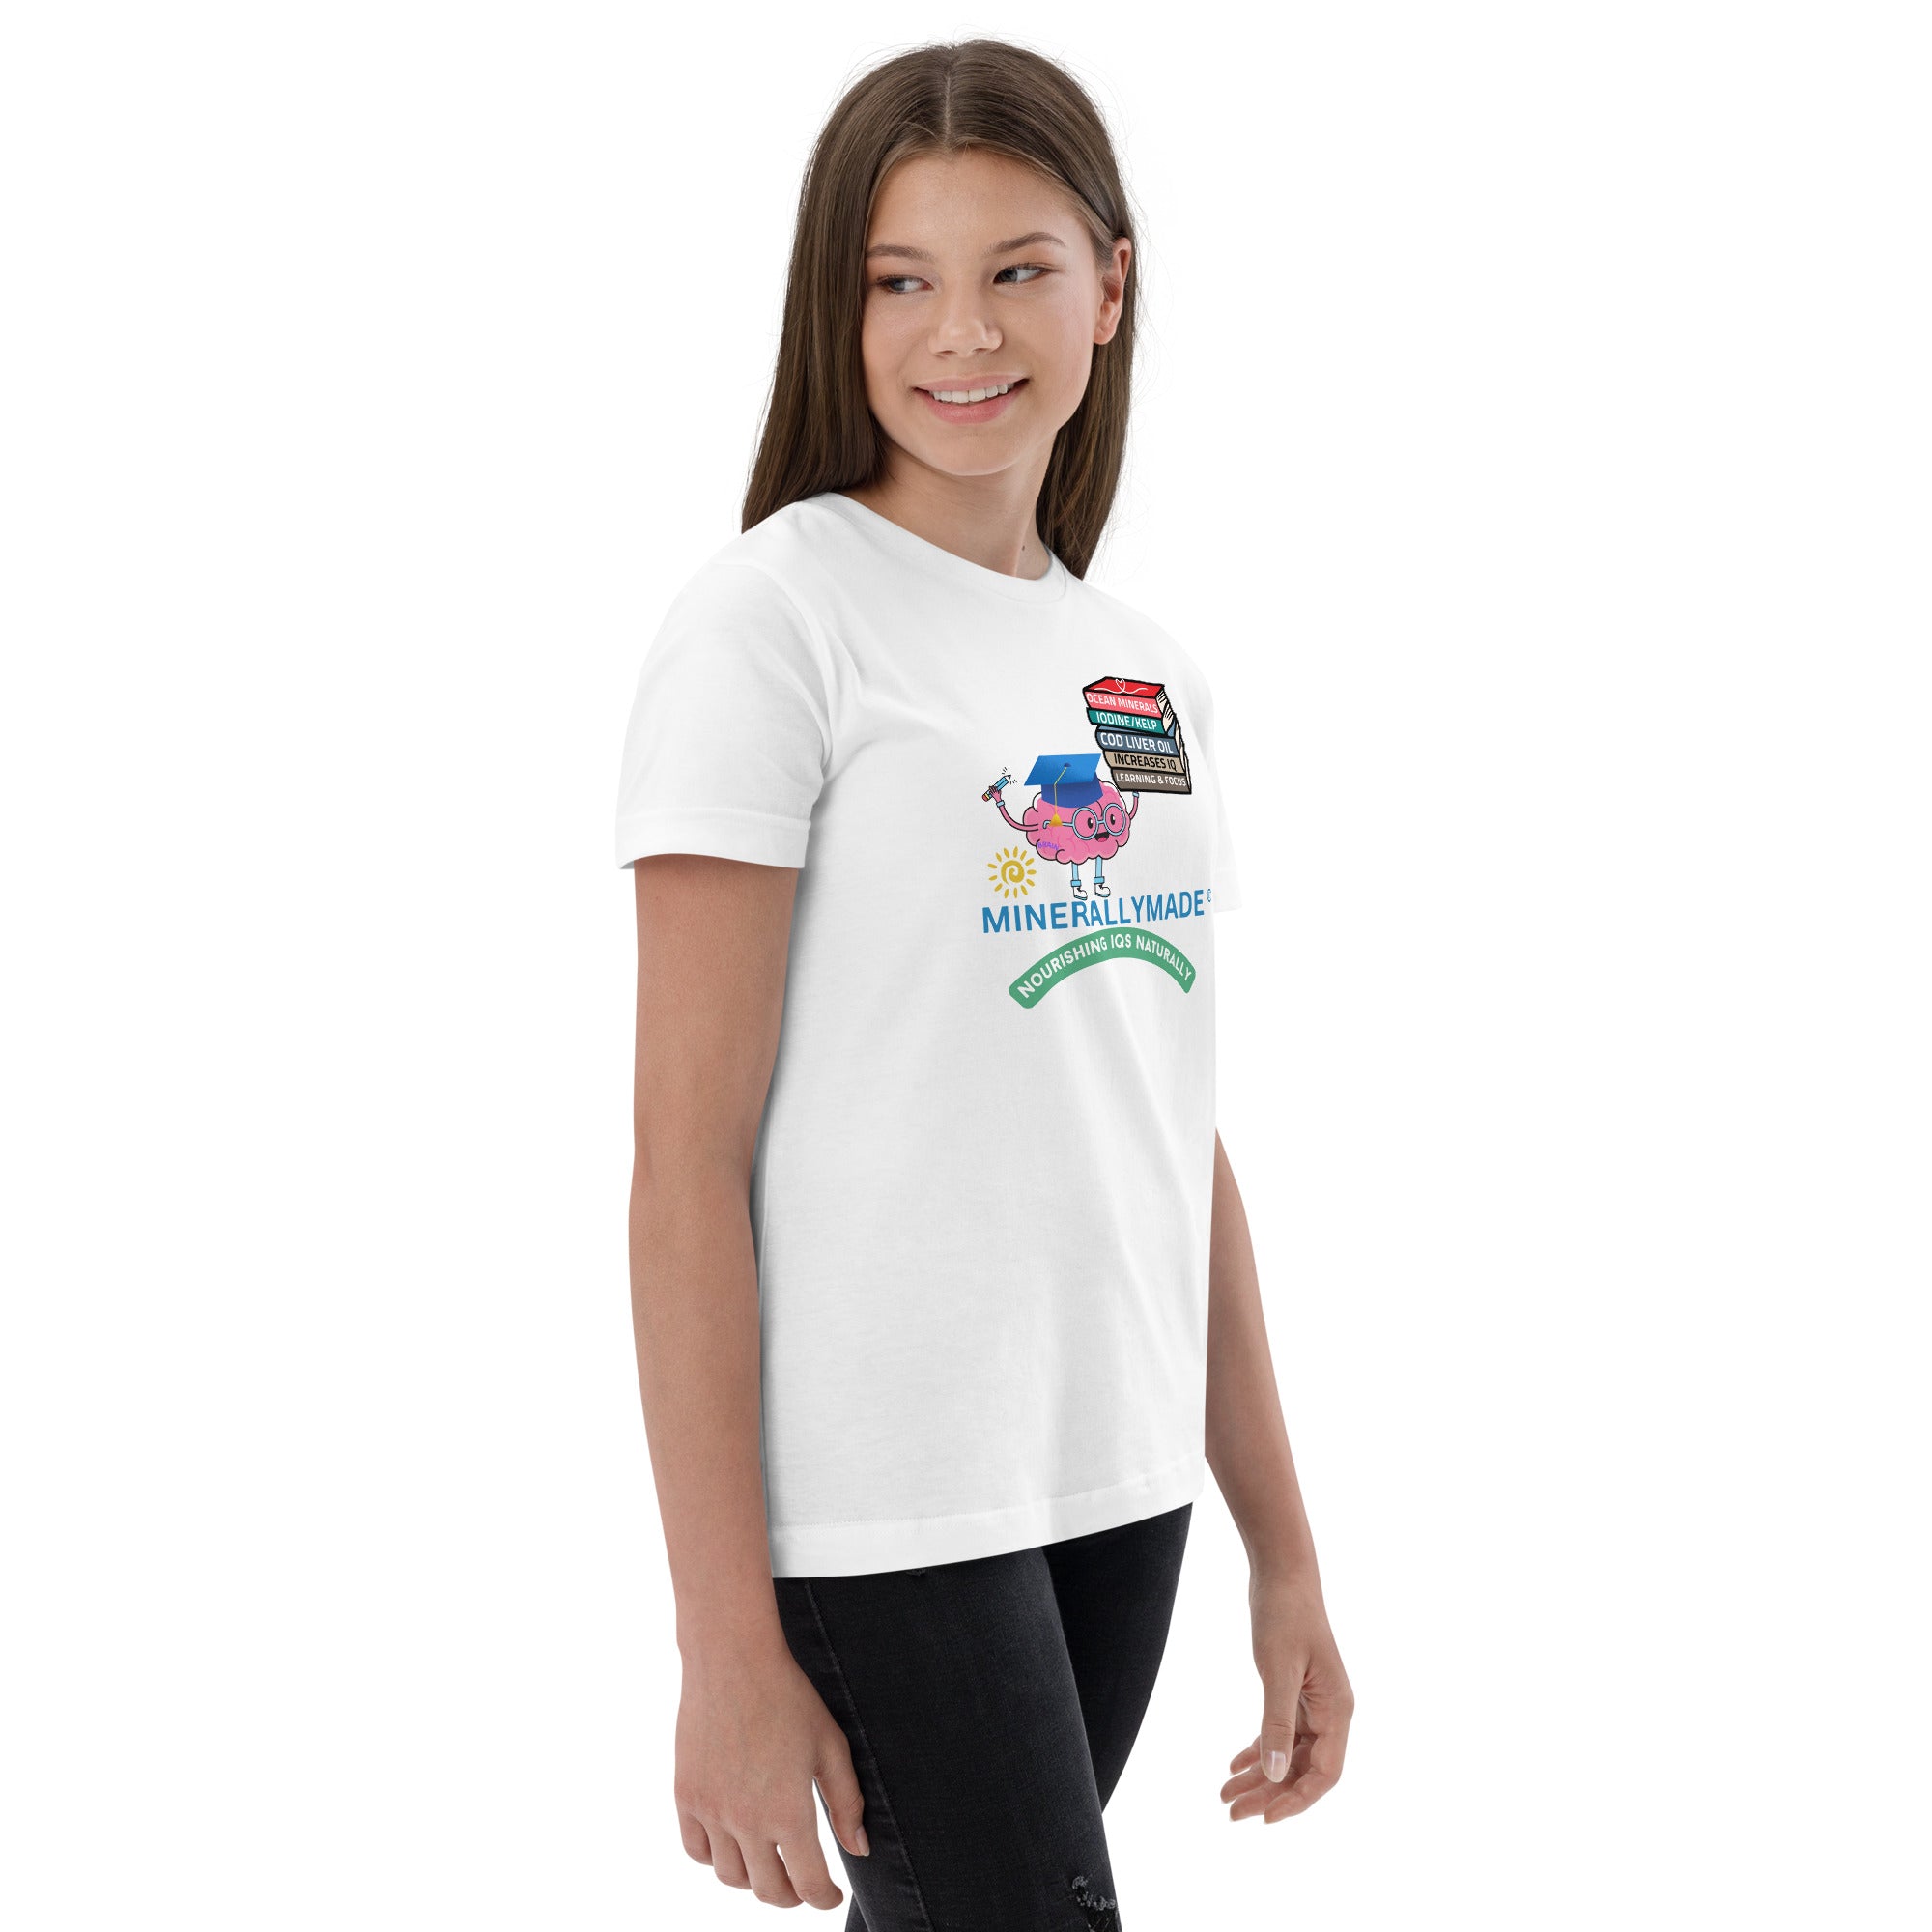 Minerallymade | Youth jersey t-shirt